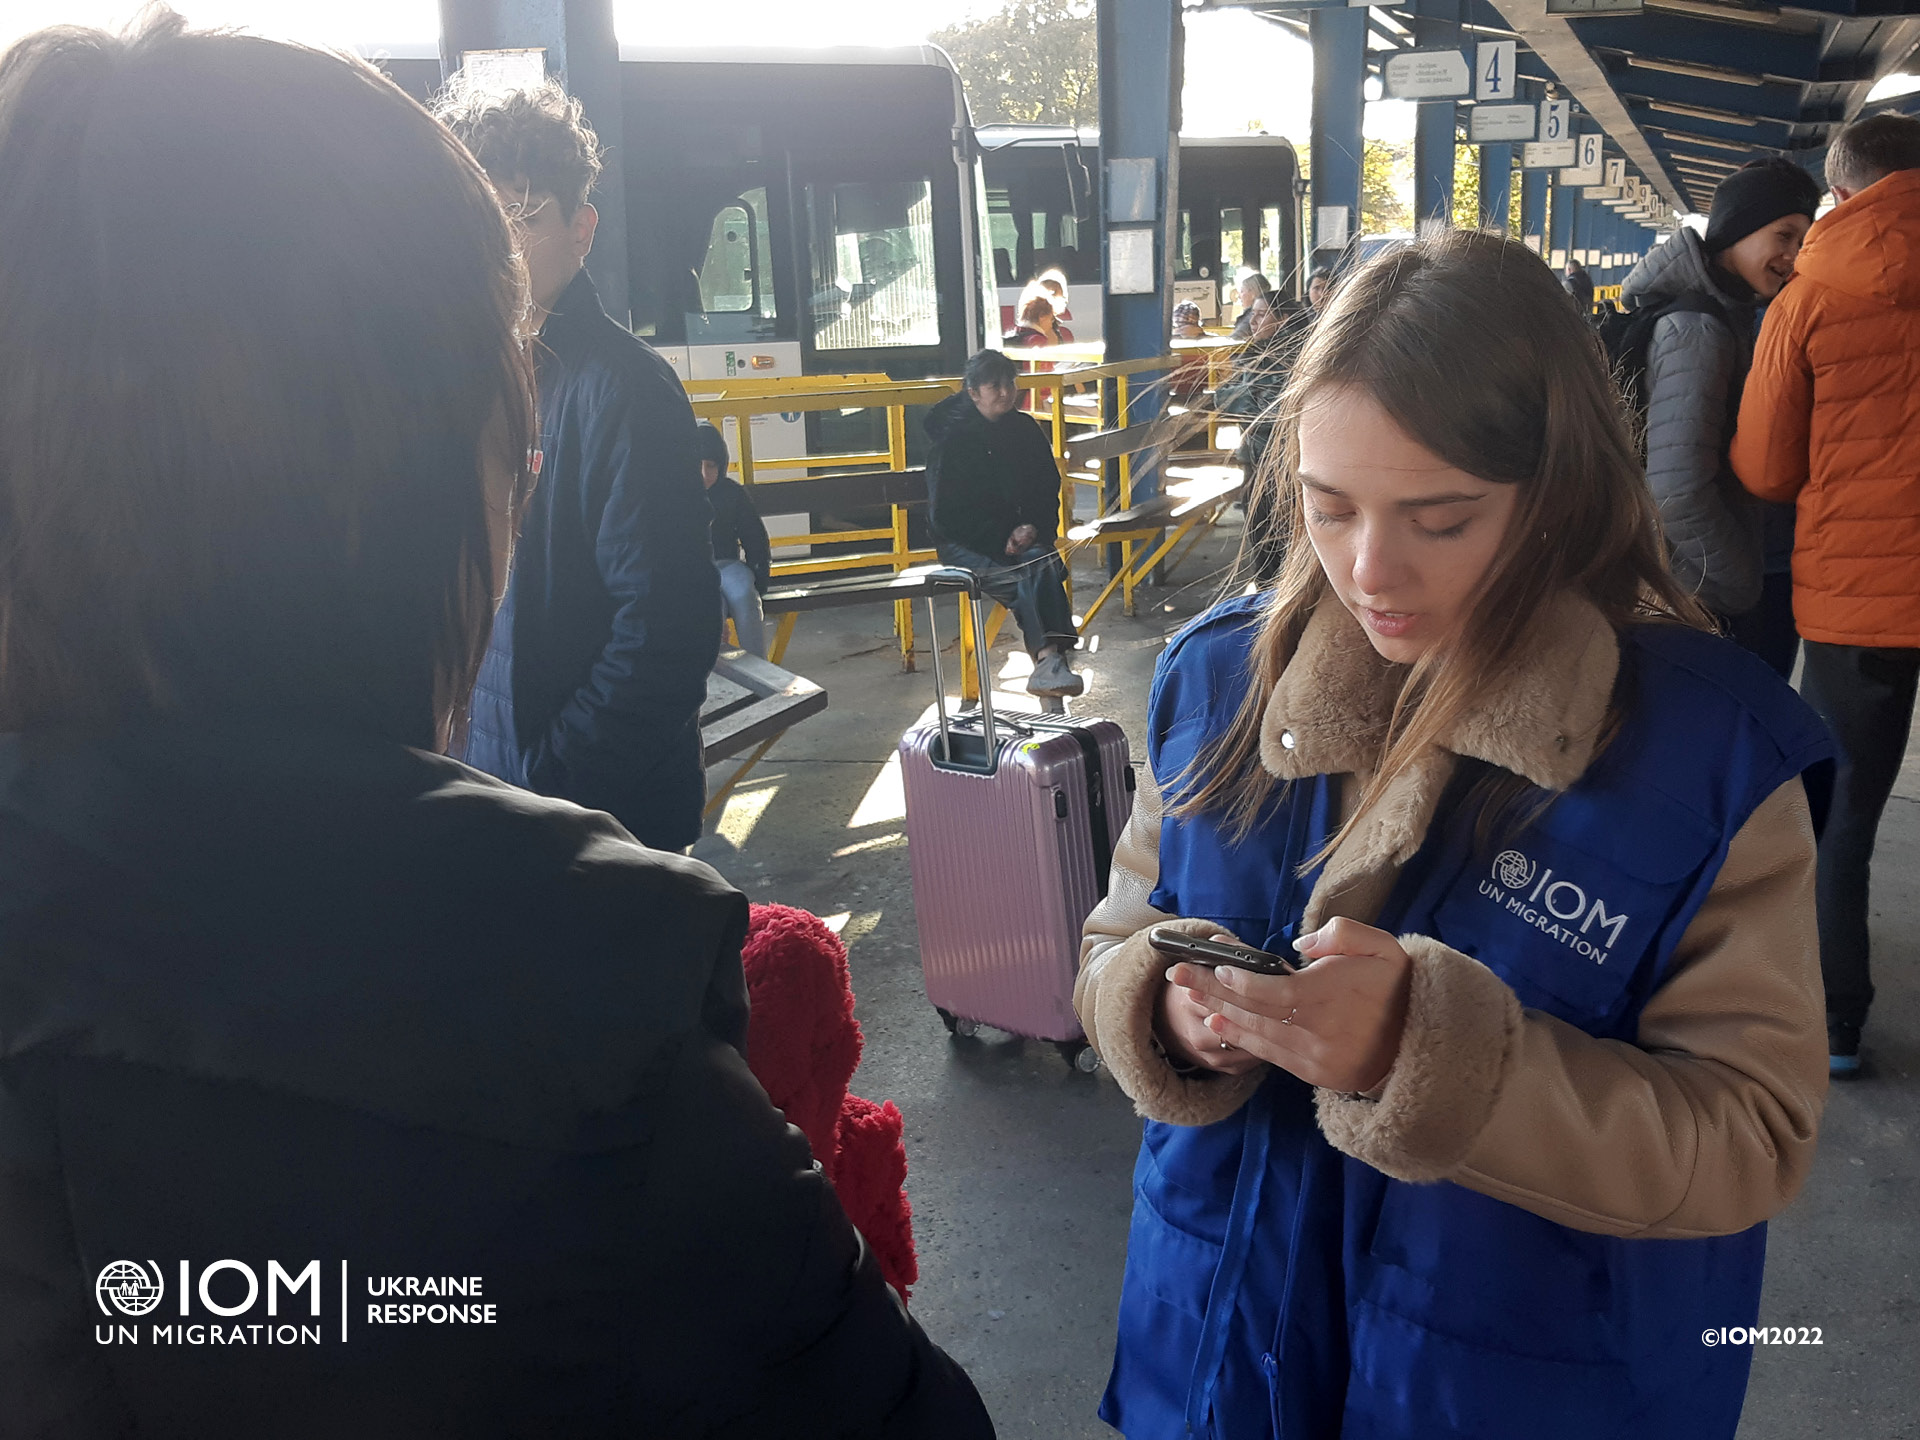 An IOM enumerator at the Bus station in Kosice conducts surveys with displaced people from Ukraine to understand their mobility, needs and intentions. Photo © International Organization for Migration (IOM) 2022.